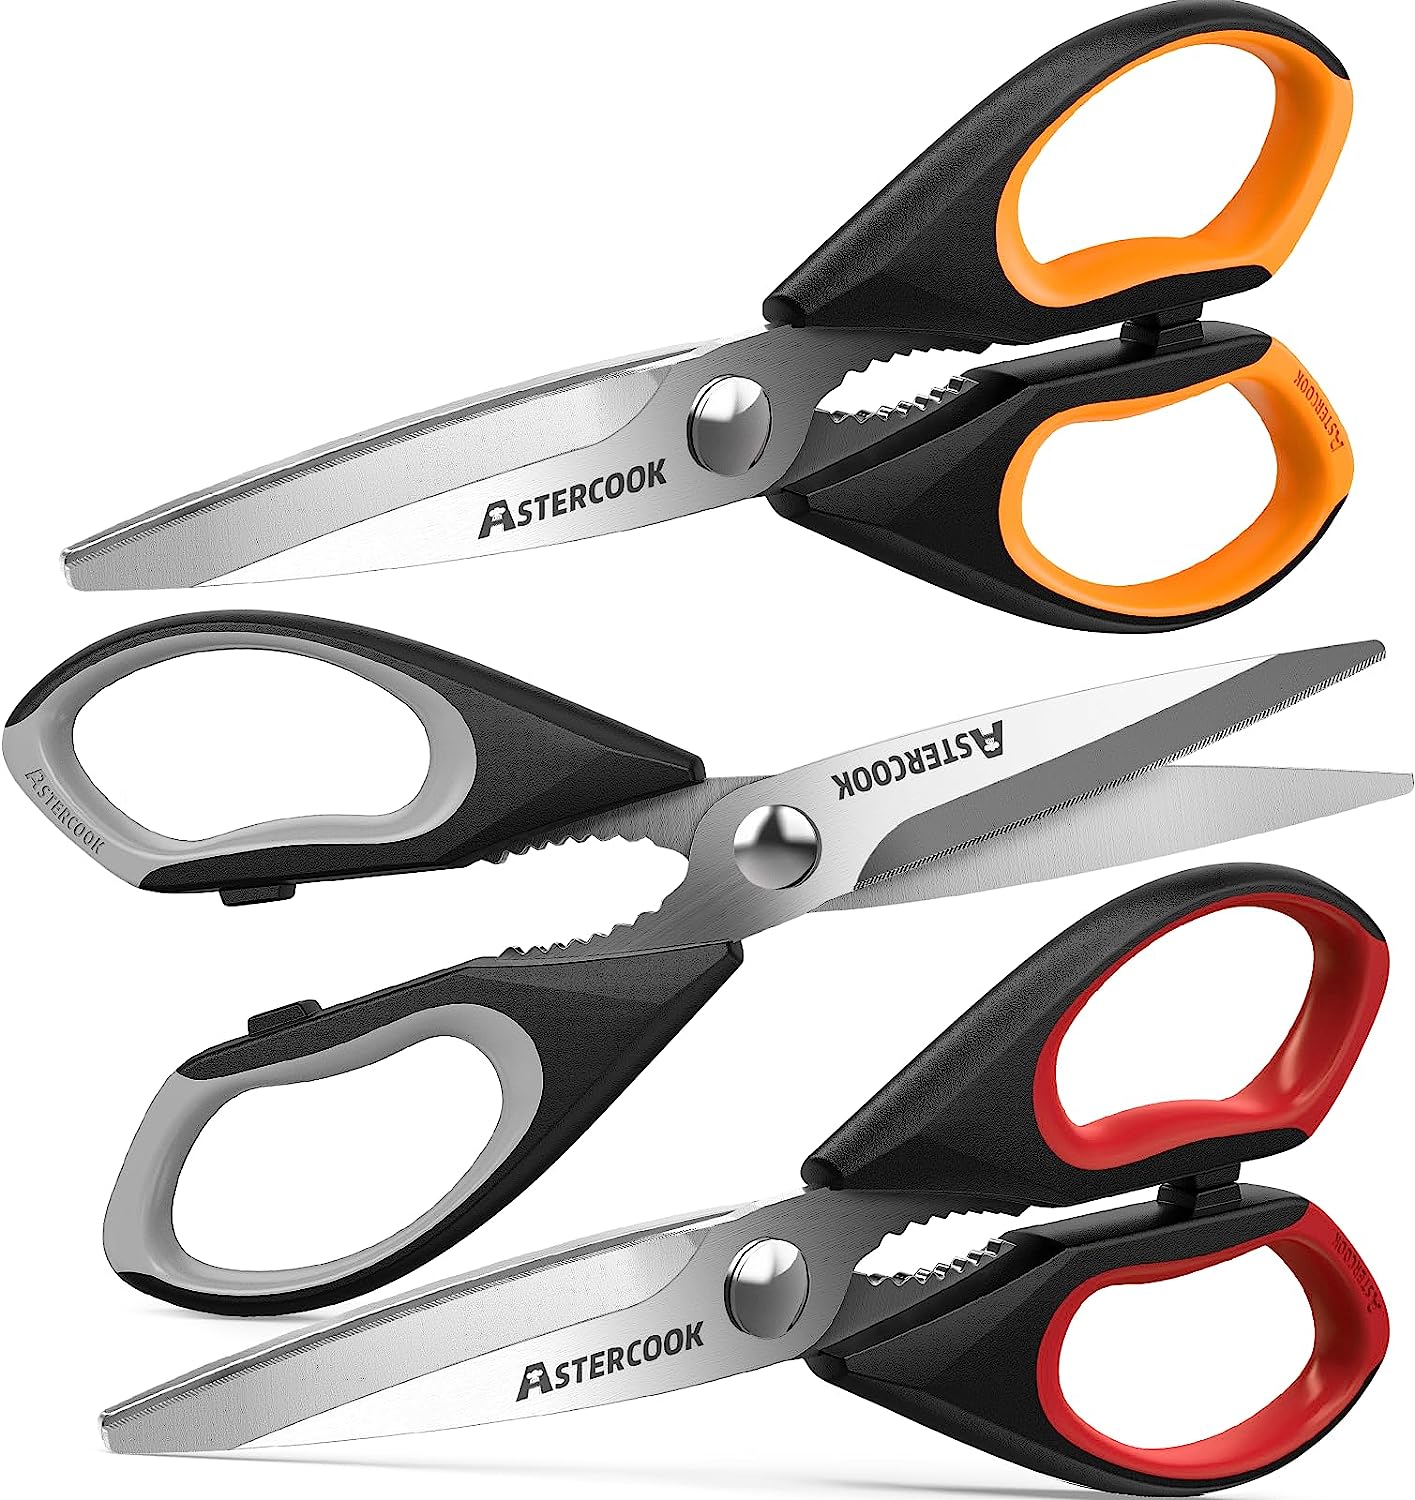 TANSUNG Kitchen Scissors, Multi-Purpose Come Apart Kitchen Shears, Premium  Stainless Steel Utility Shears for Meat, Food, Dishwasher Safe (Gray+Black)